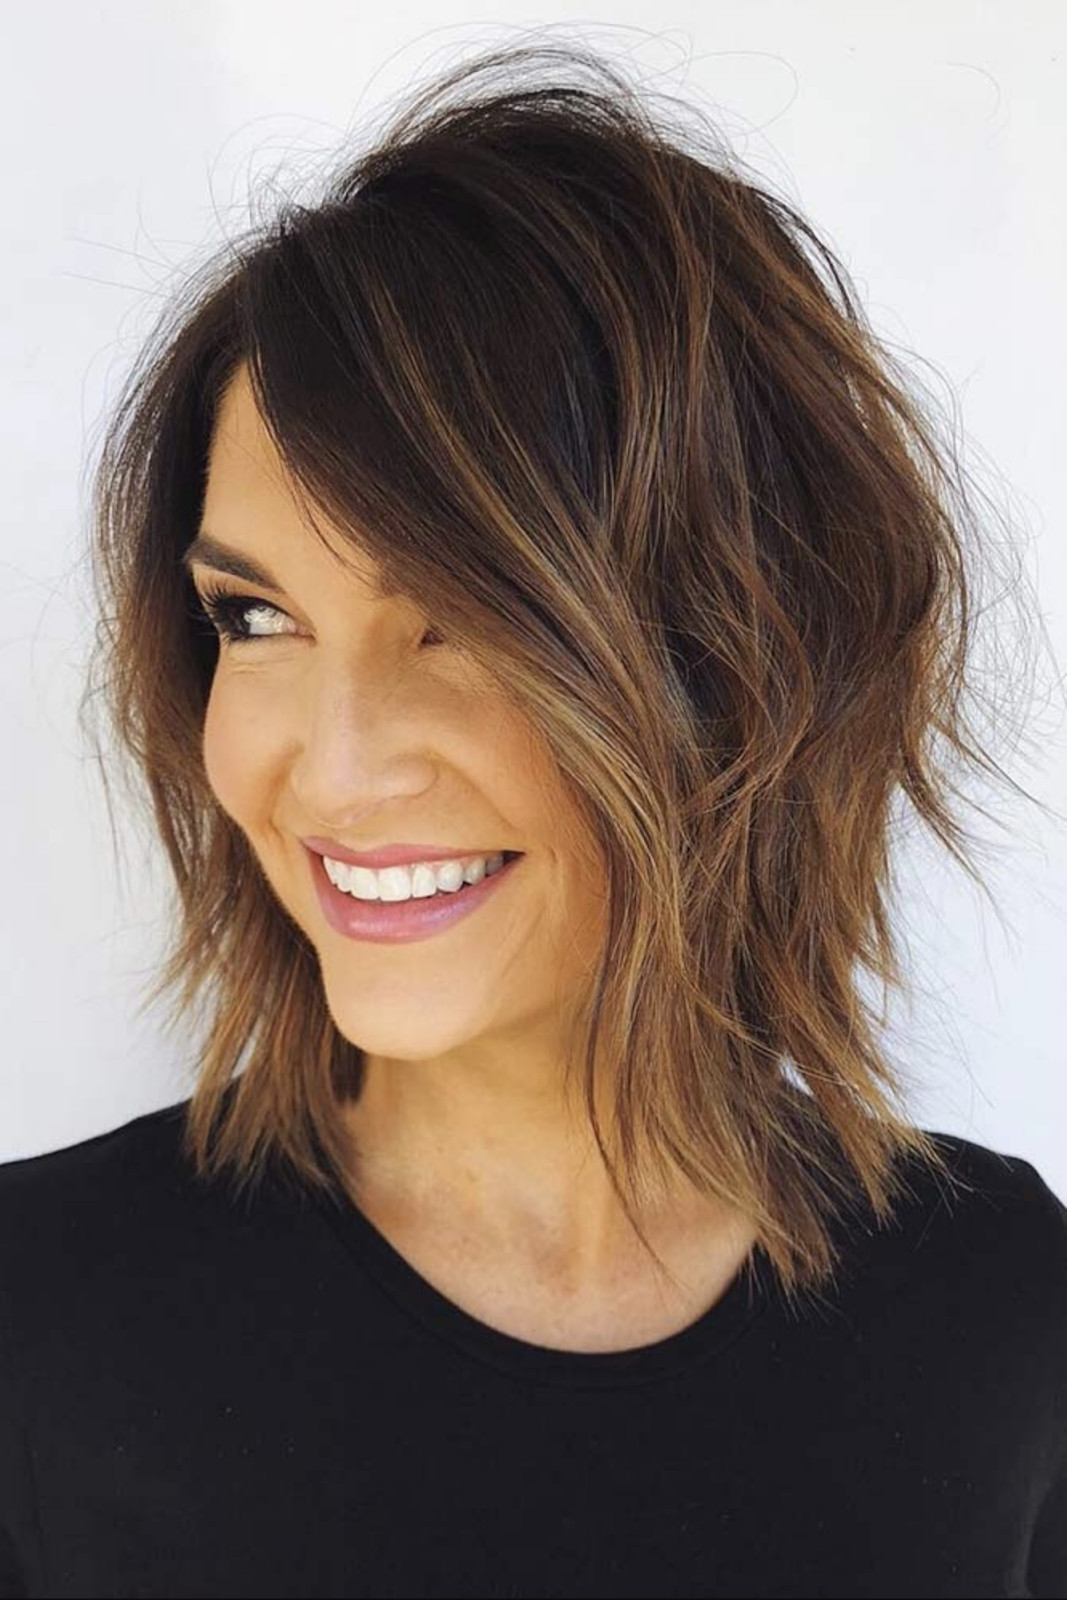 New Women Hairstyles For 2020
 2019 2020 Short Hairstyles for Women Over 50 That Are